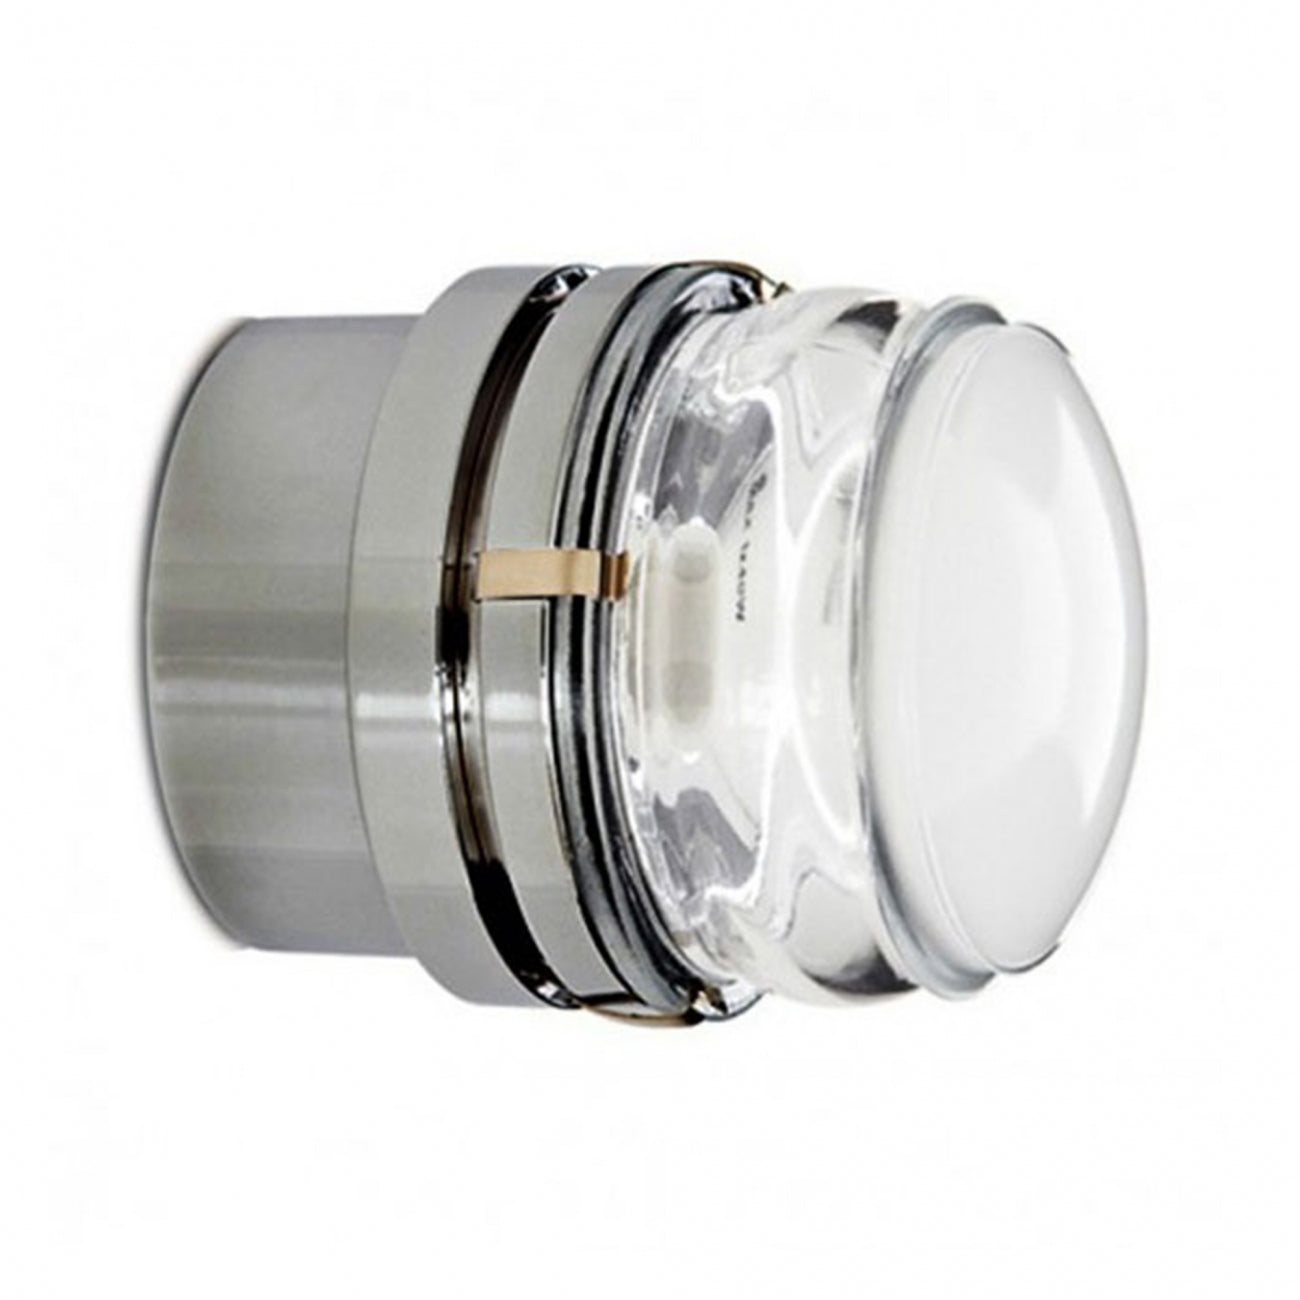 Fresnel Inside and Outside Wall or Ceiling Lamp by Oluce